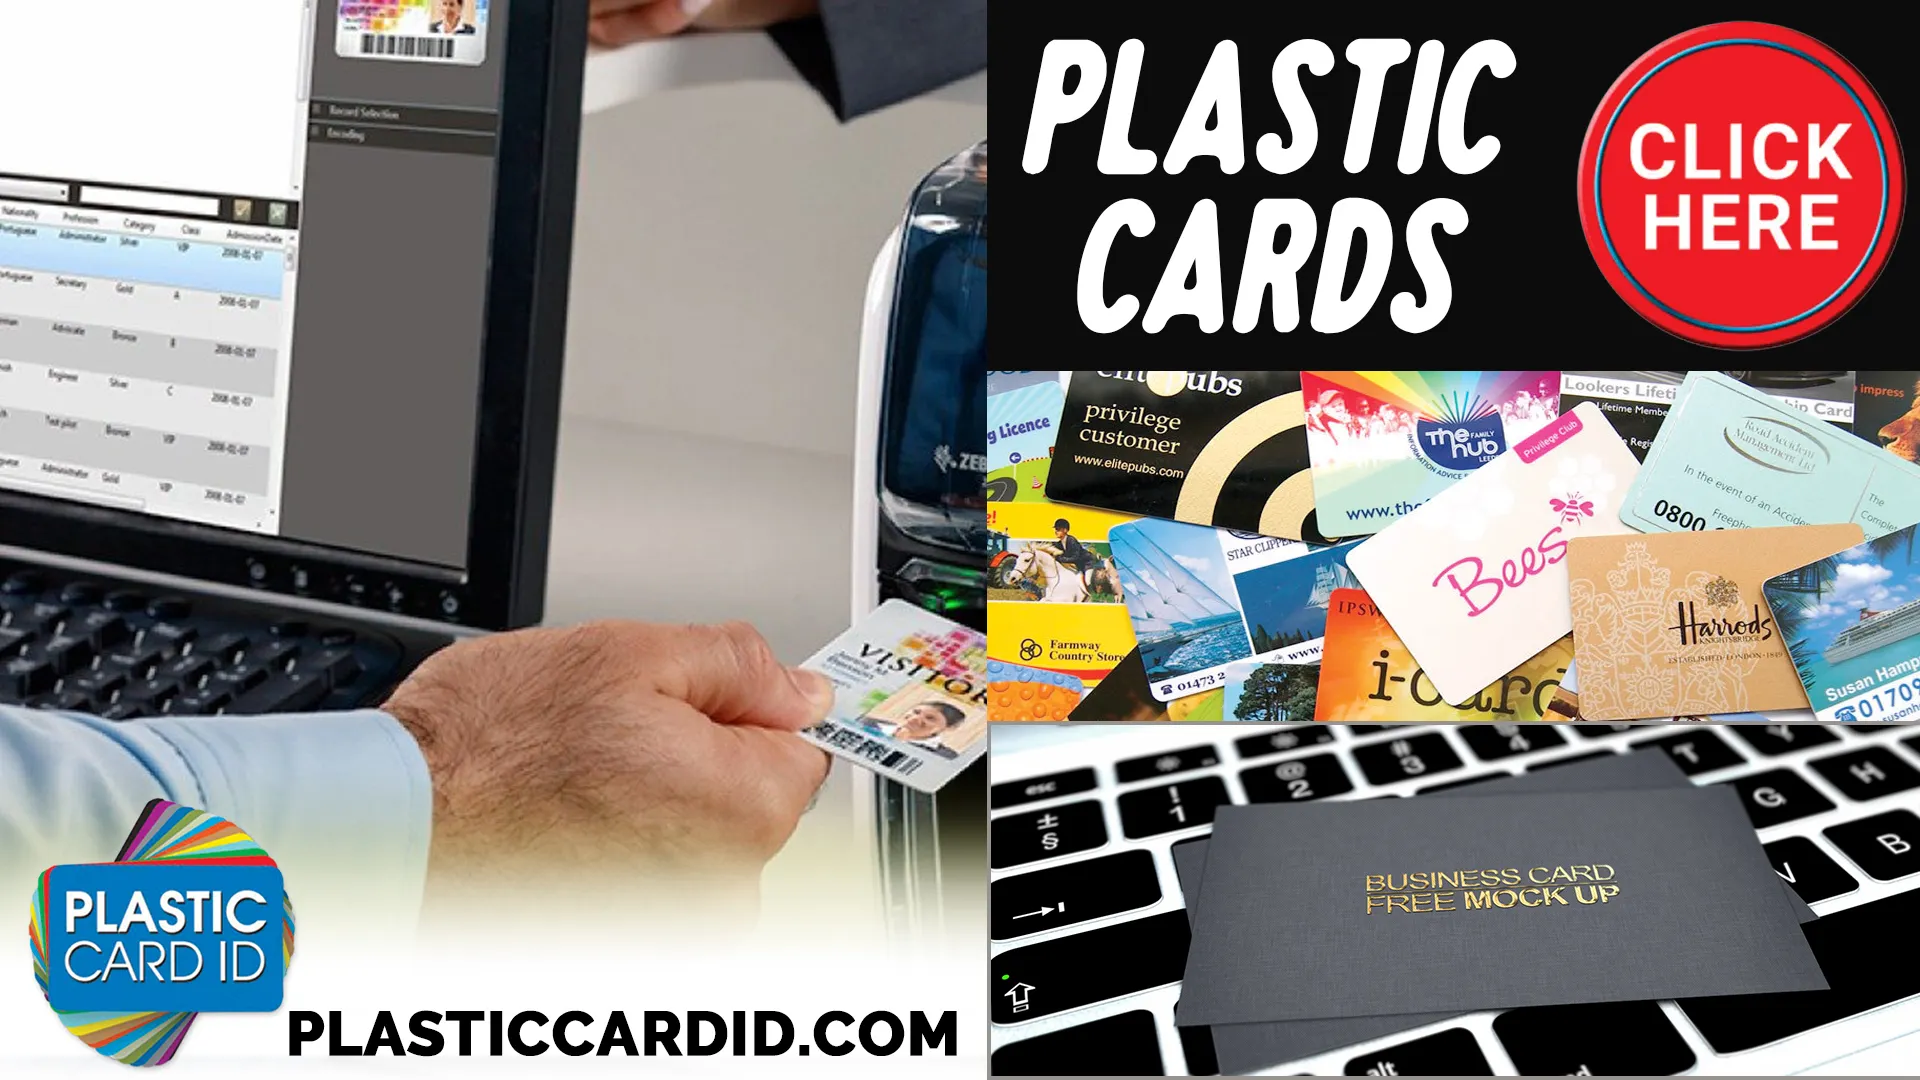 Making It Easy for You to Dispose Plastic Cards Responsibly